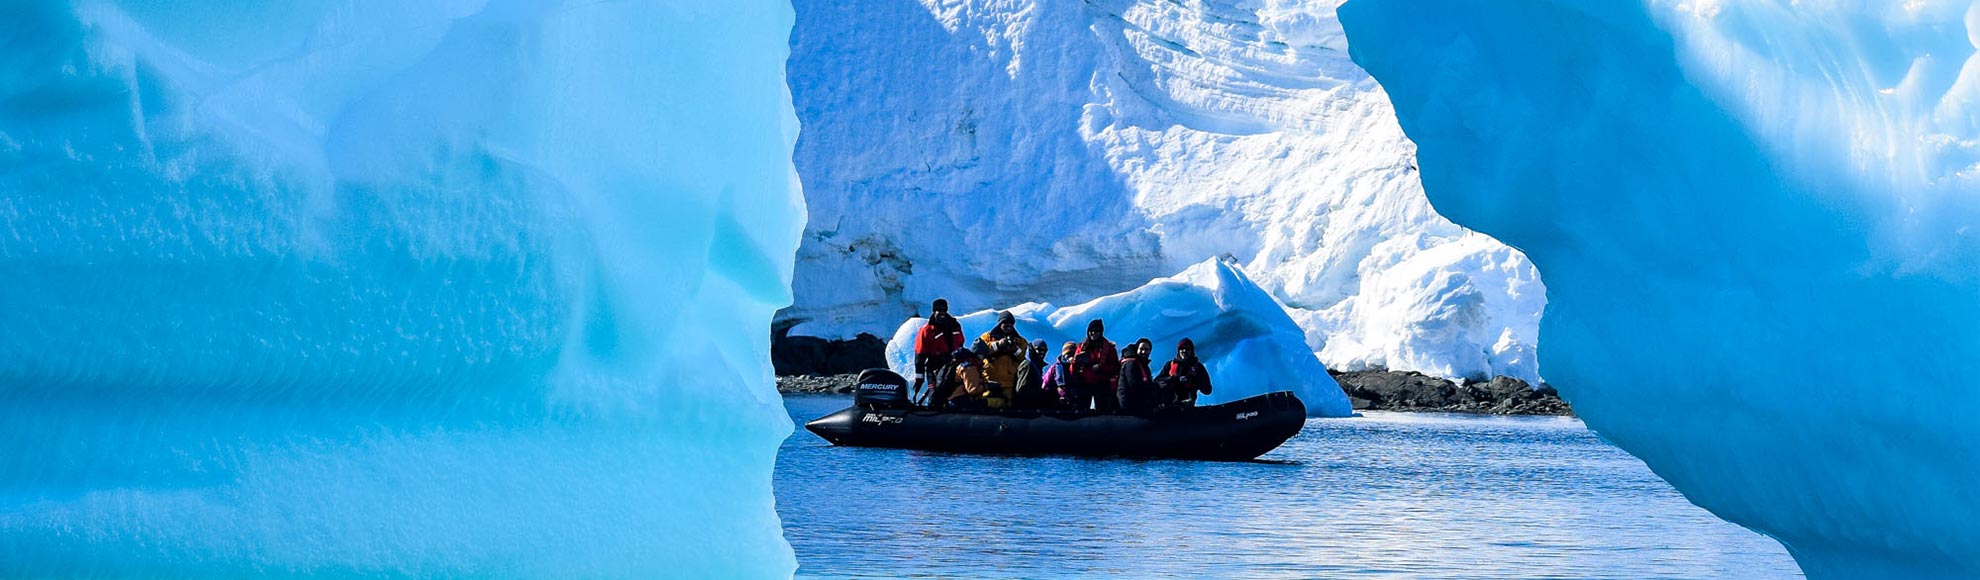 Several people on a boat, on the waters in Antarctica. Seen through two large chunks of ice.